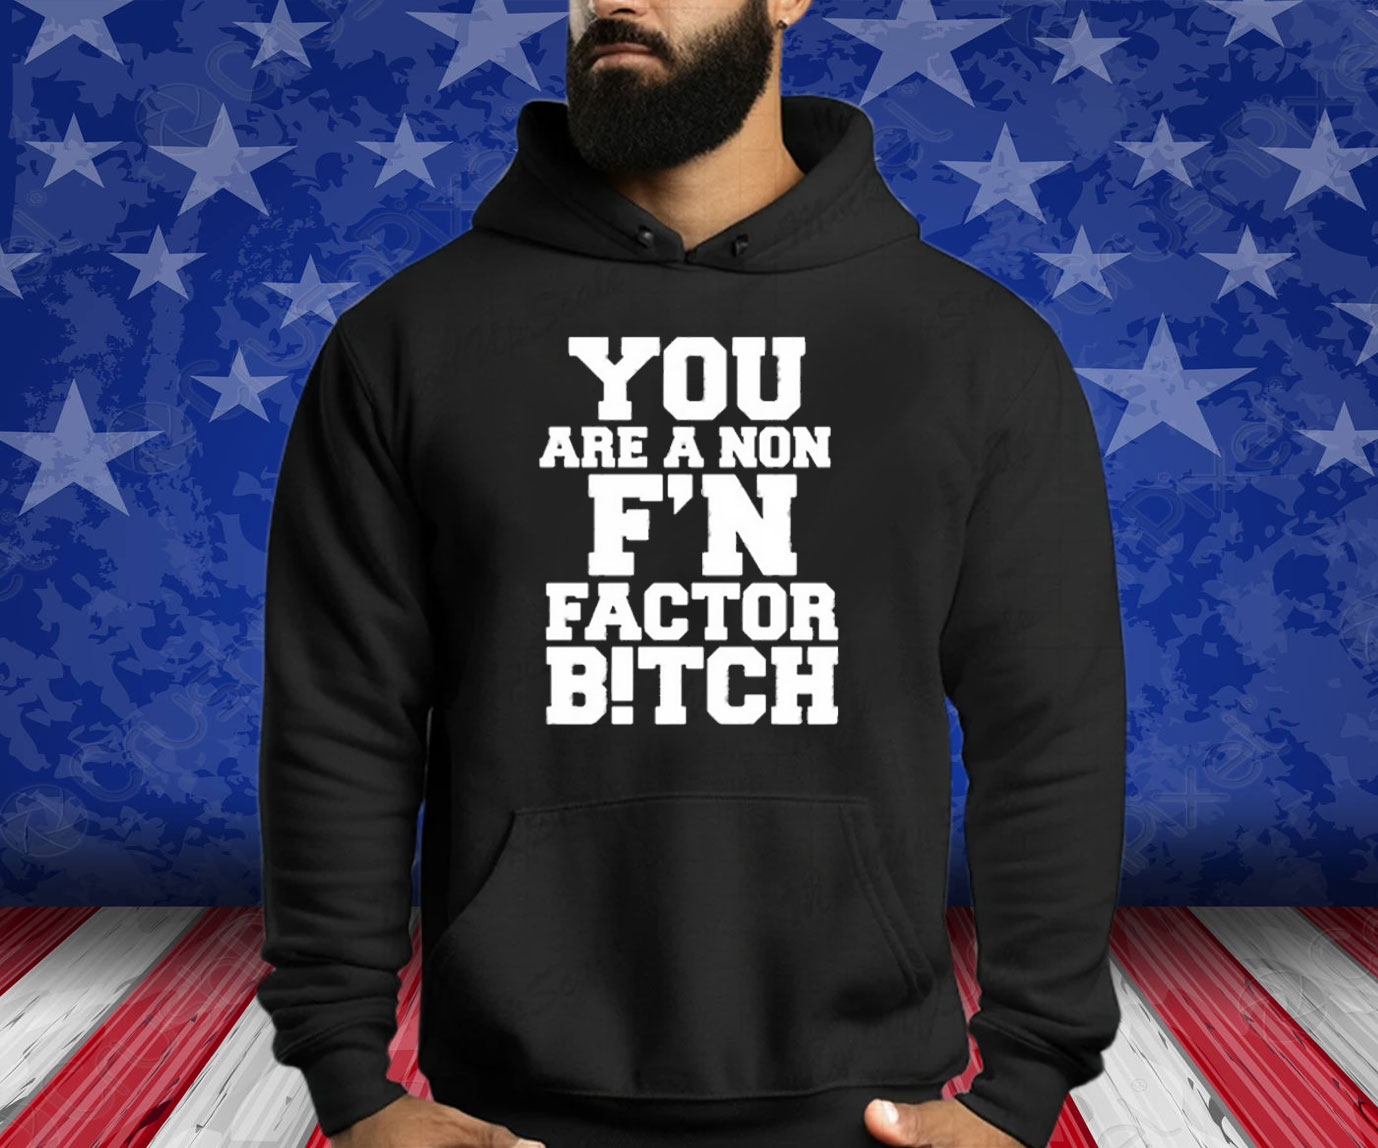 You Are A Non F’n Factor Bitch Shirts